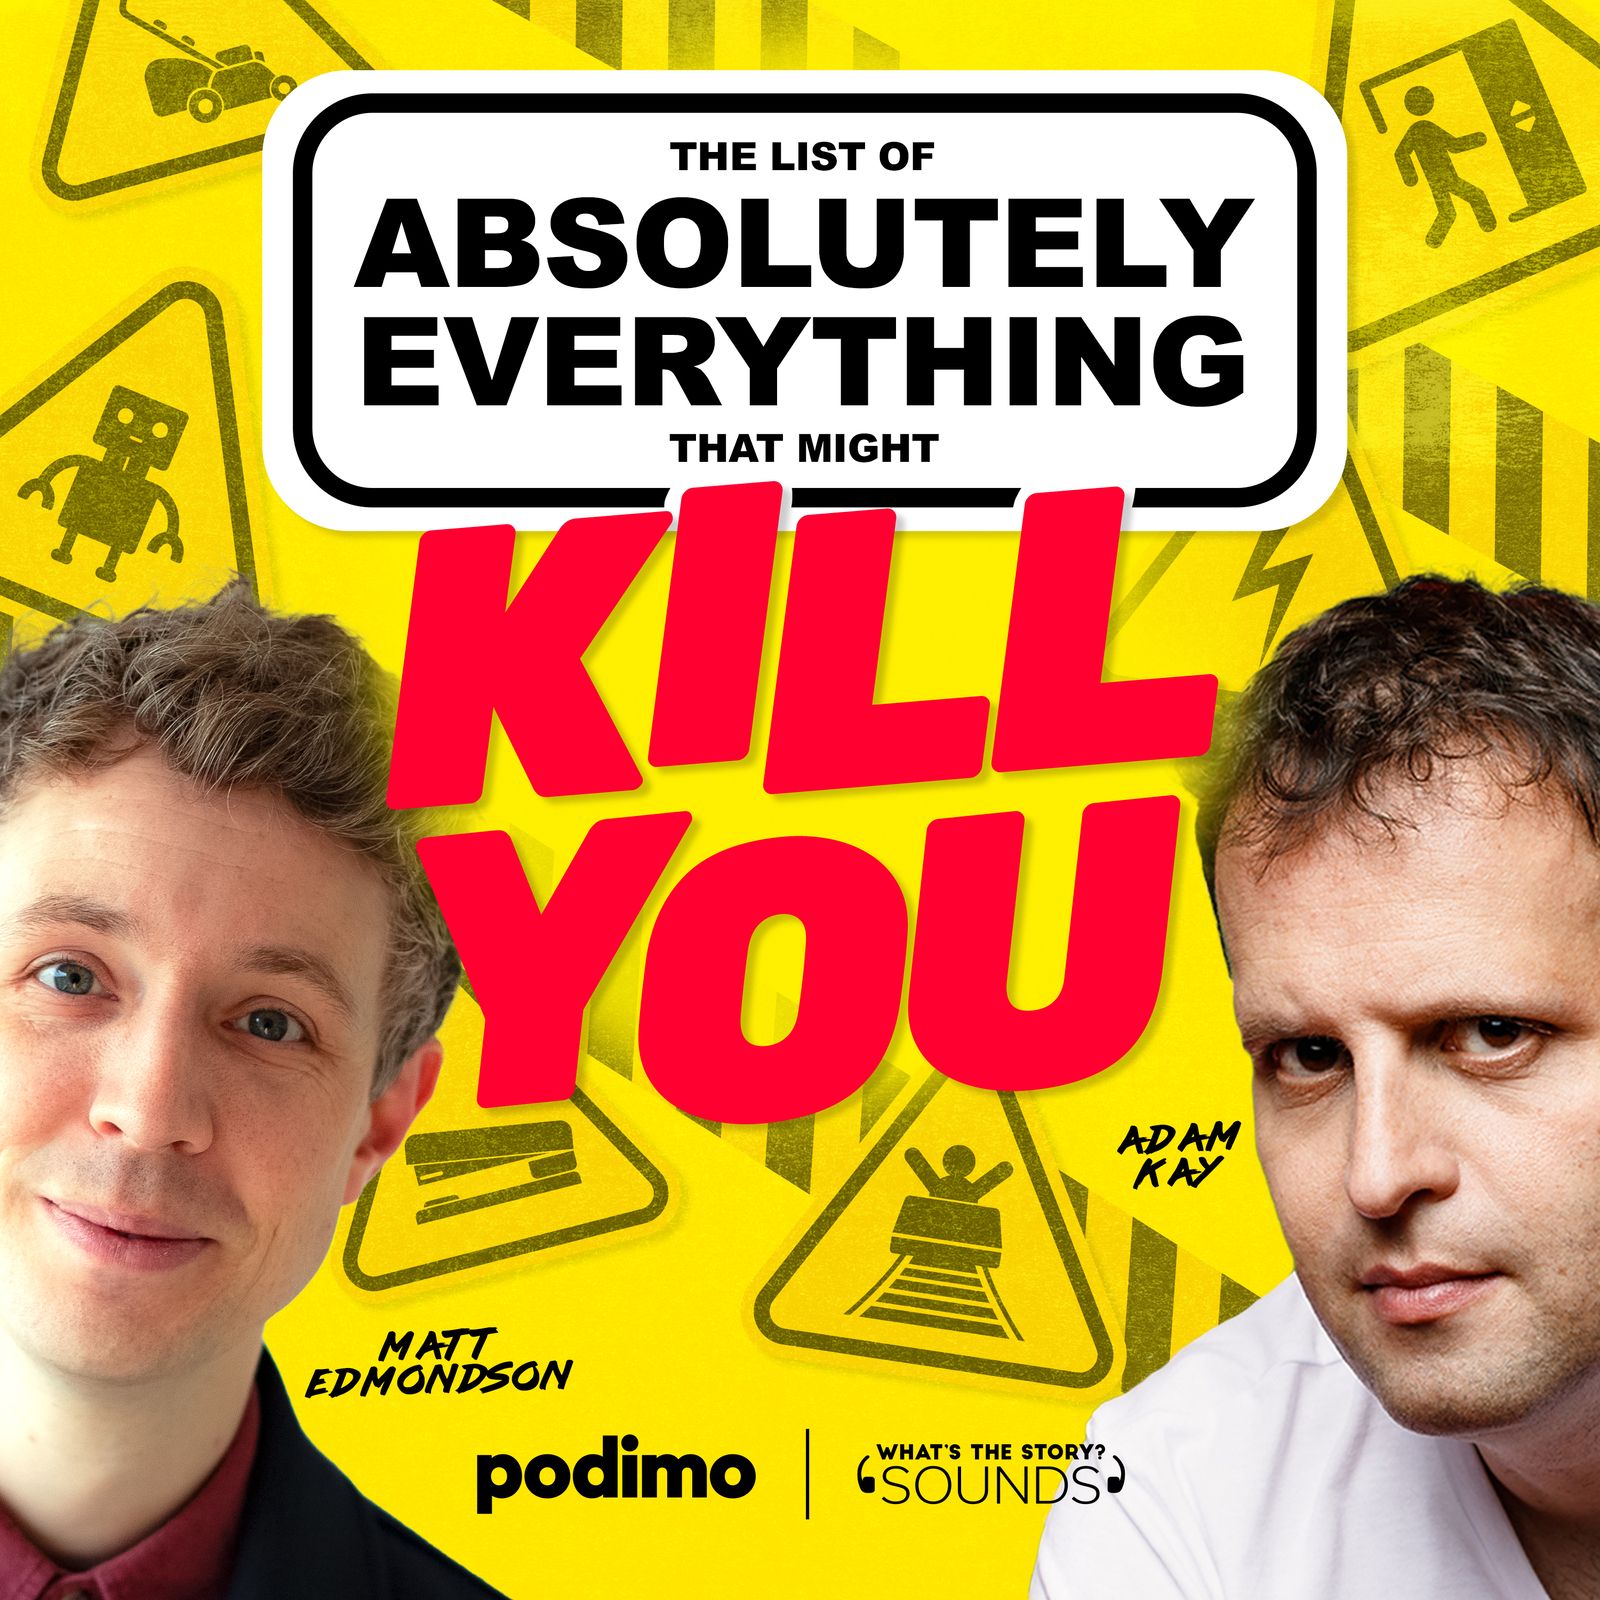 The List of Absolutely Everything That Might Kill You podcast show image